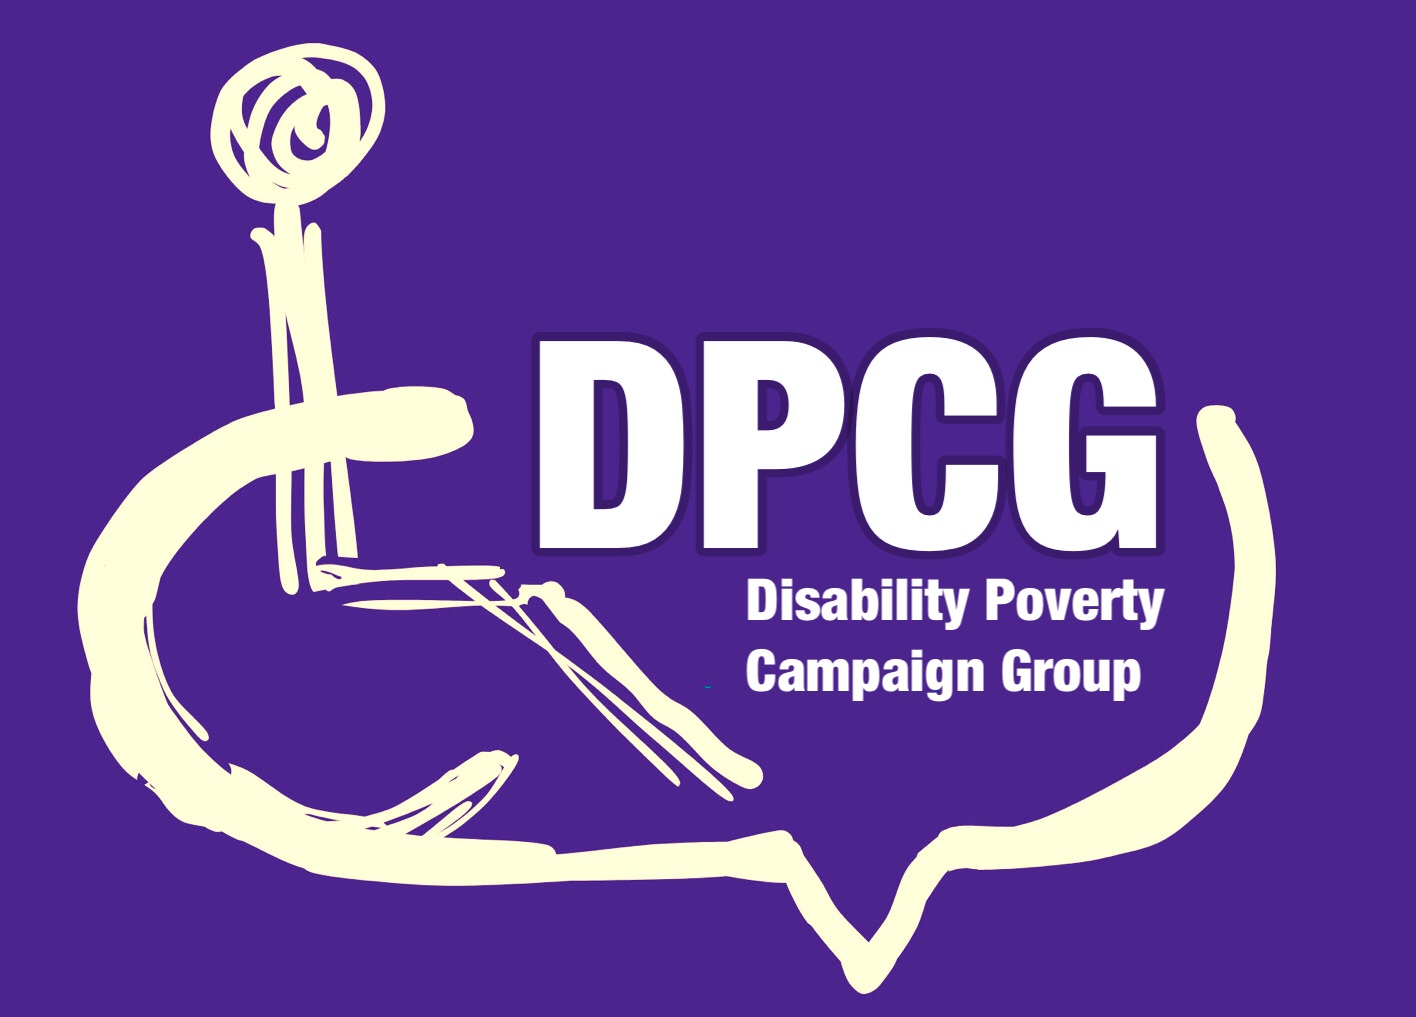 Disability Poverty Campaign Group 